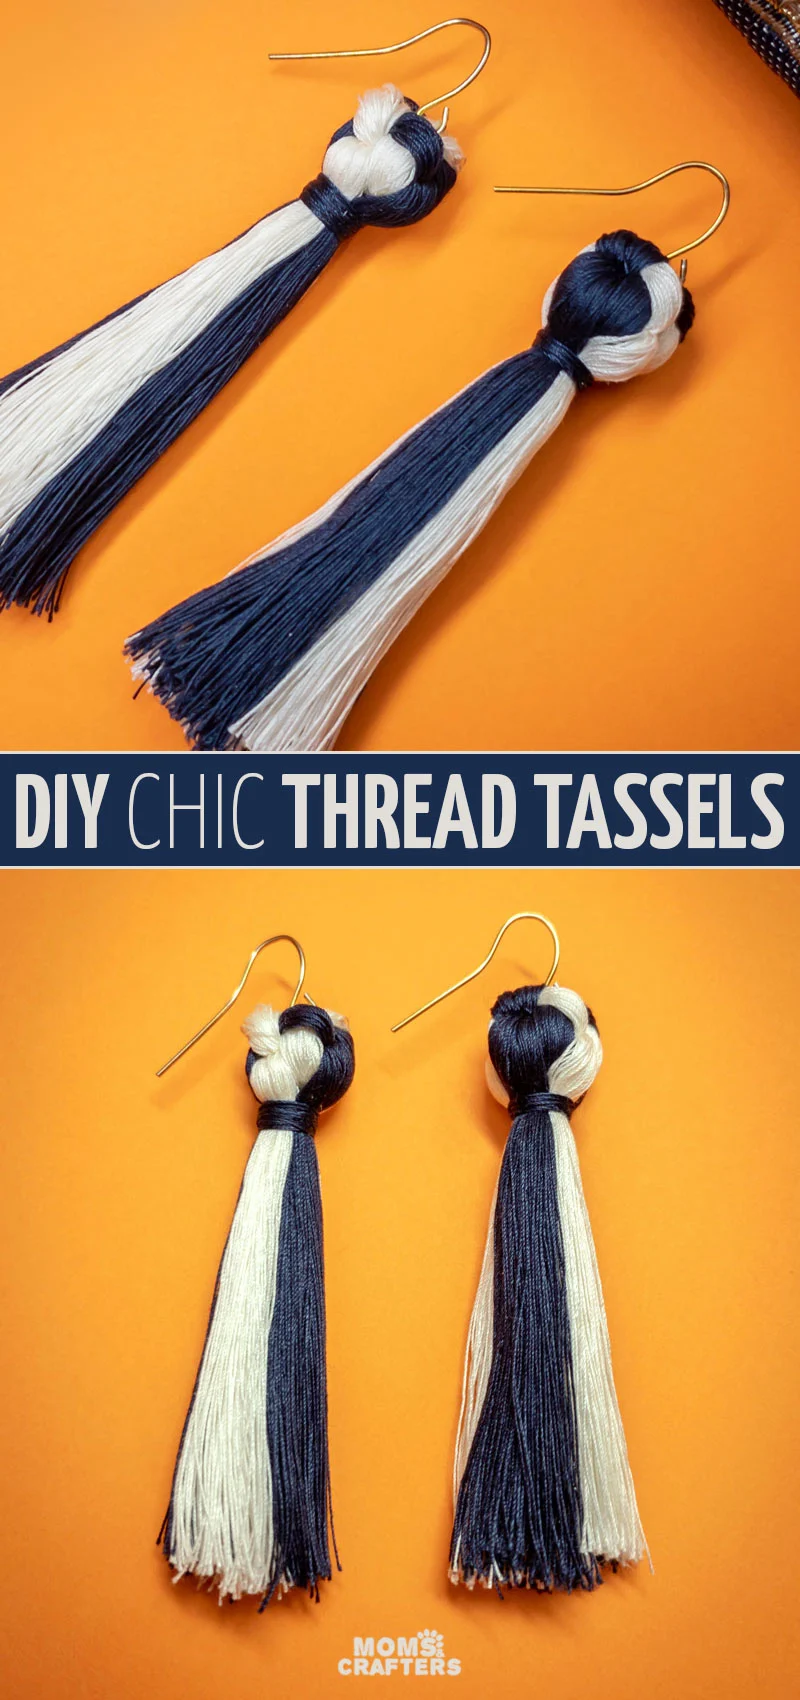 Click to learn how to make earrings with thread. These fun dangle tassel earrings are sophisticated but an easy jewelry making project for beginners. You'll love this silk thread earring tutorial